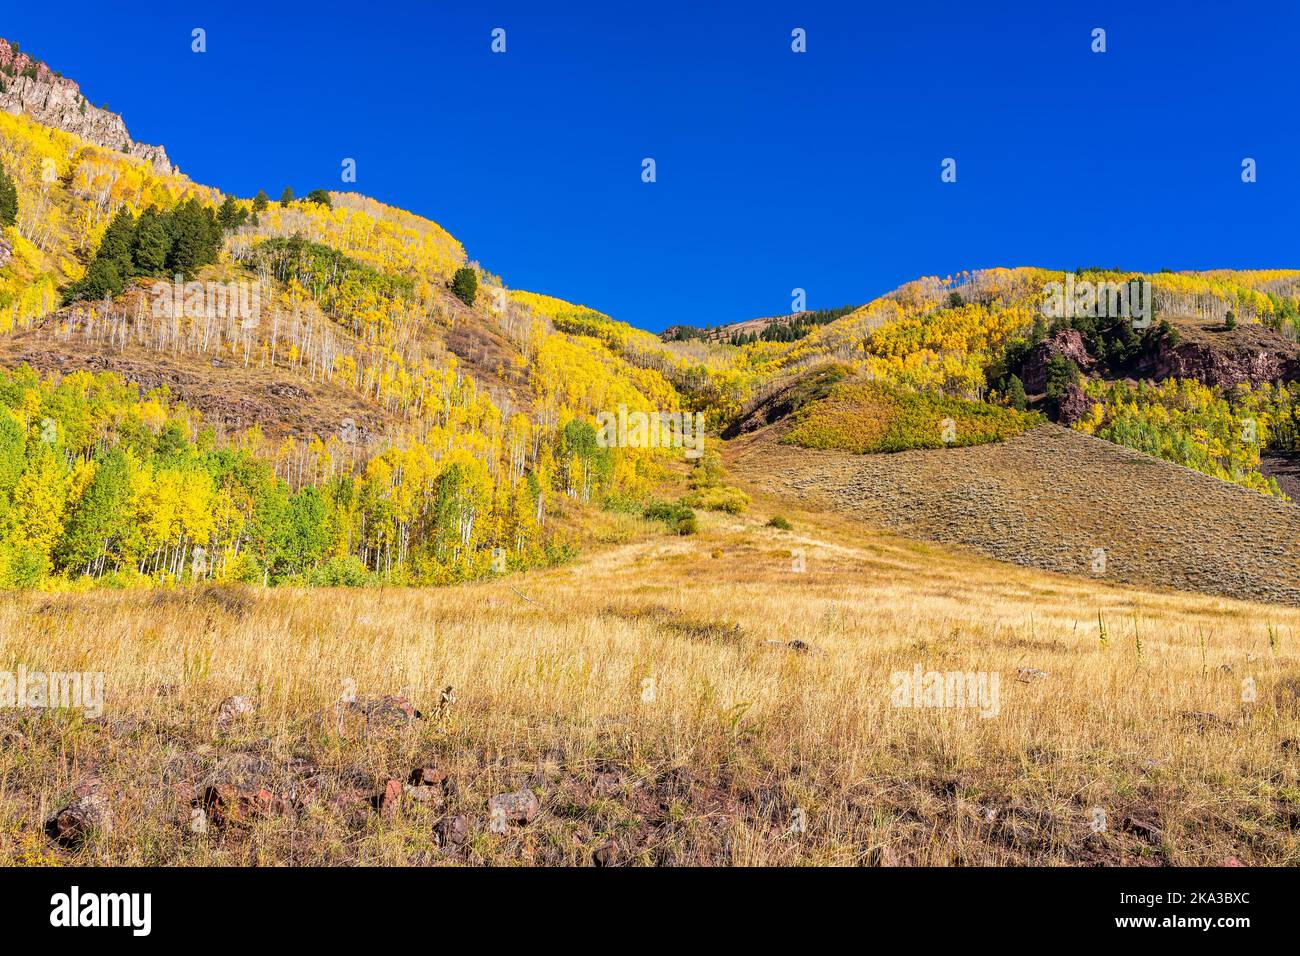 Maroon Bells area with vibrant yellow foliage aspen trees in Colorado rocky mountains autumn fall peak with deep blue sky on sunny day Stock Photo